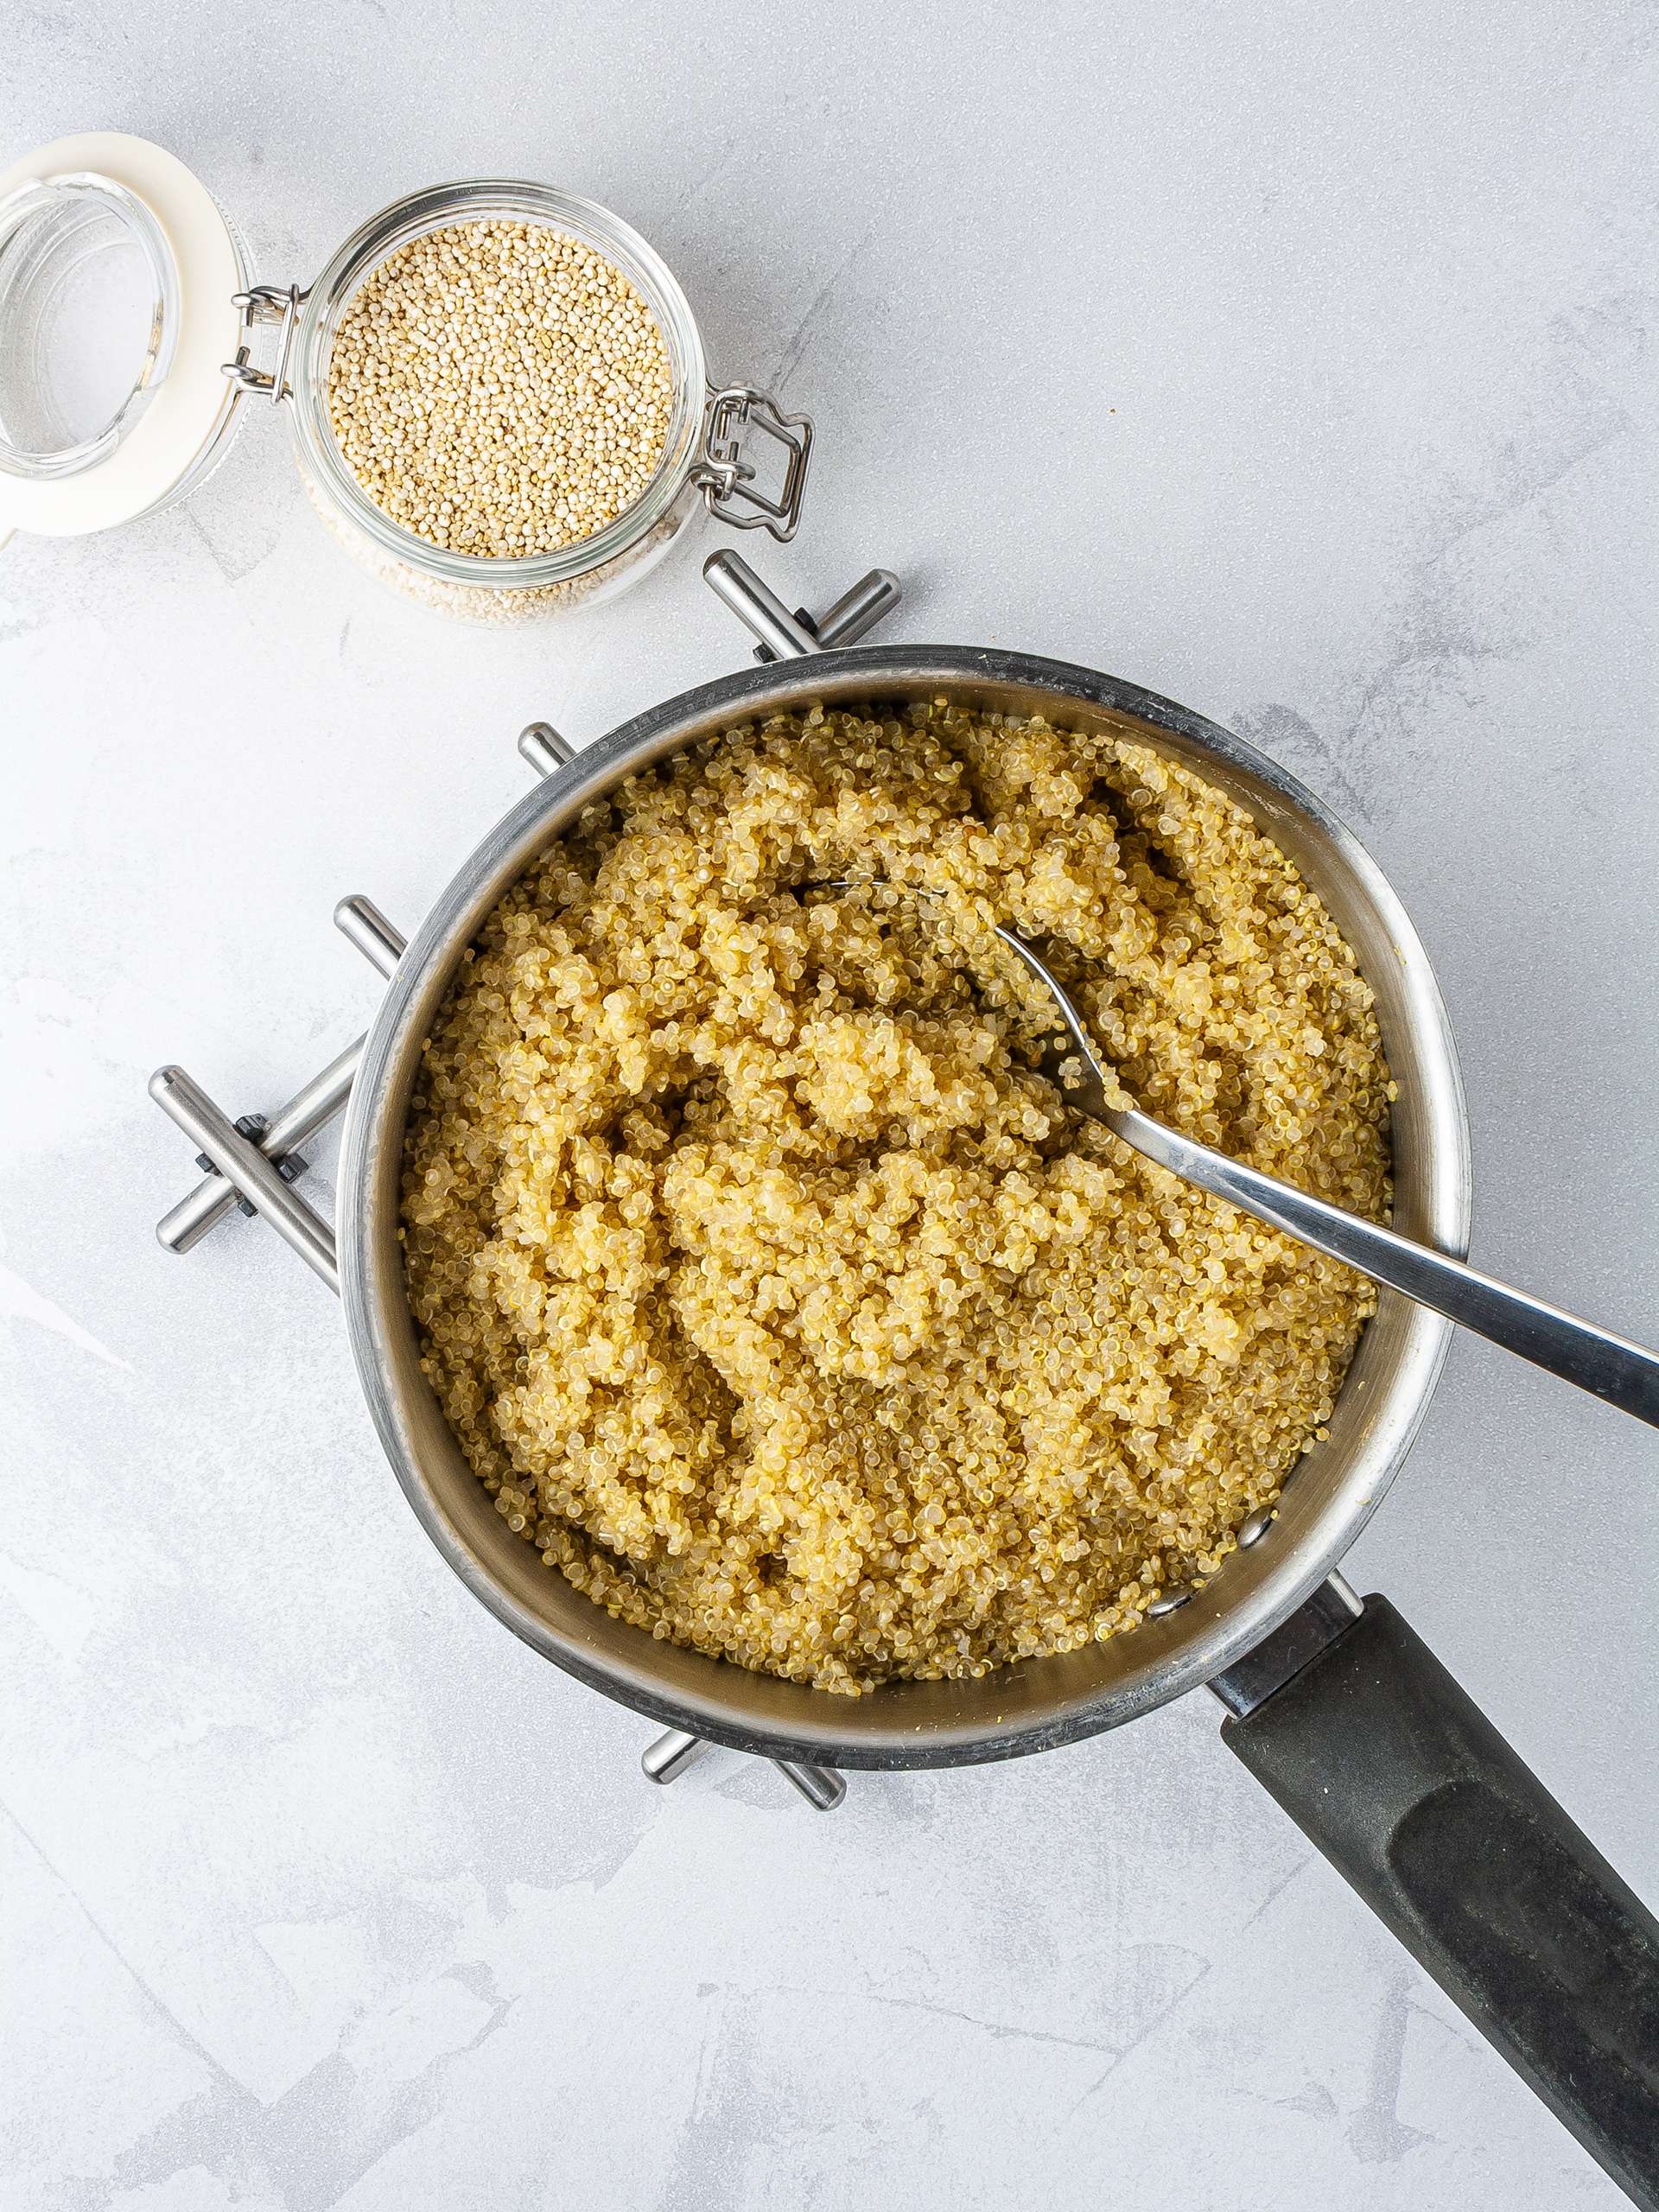 Cooked quinoa in a pan.